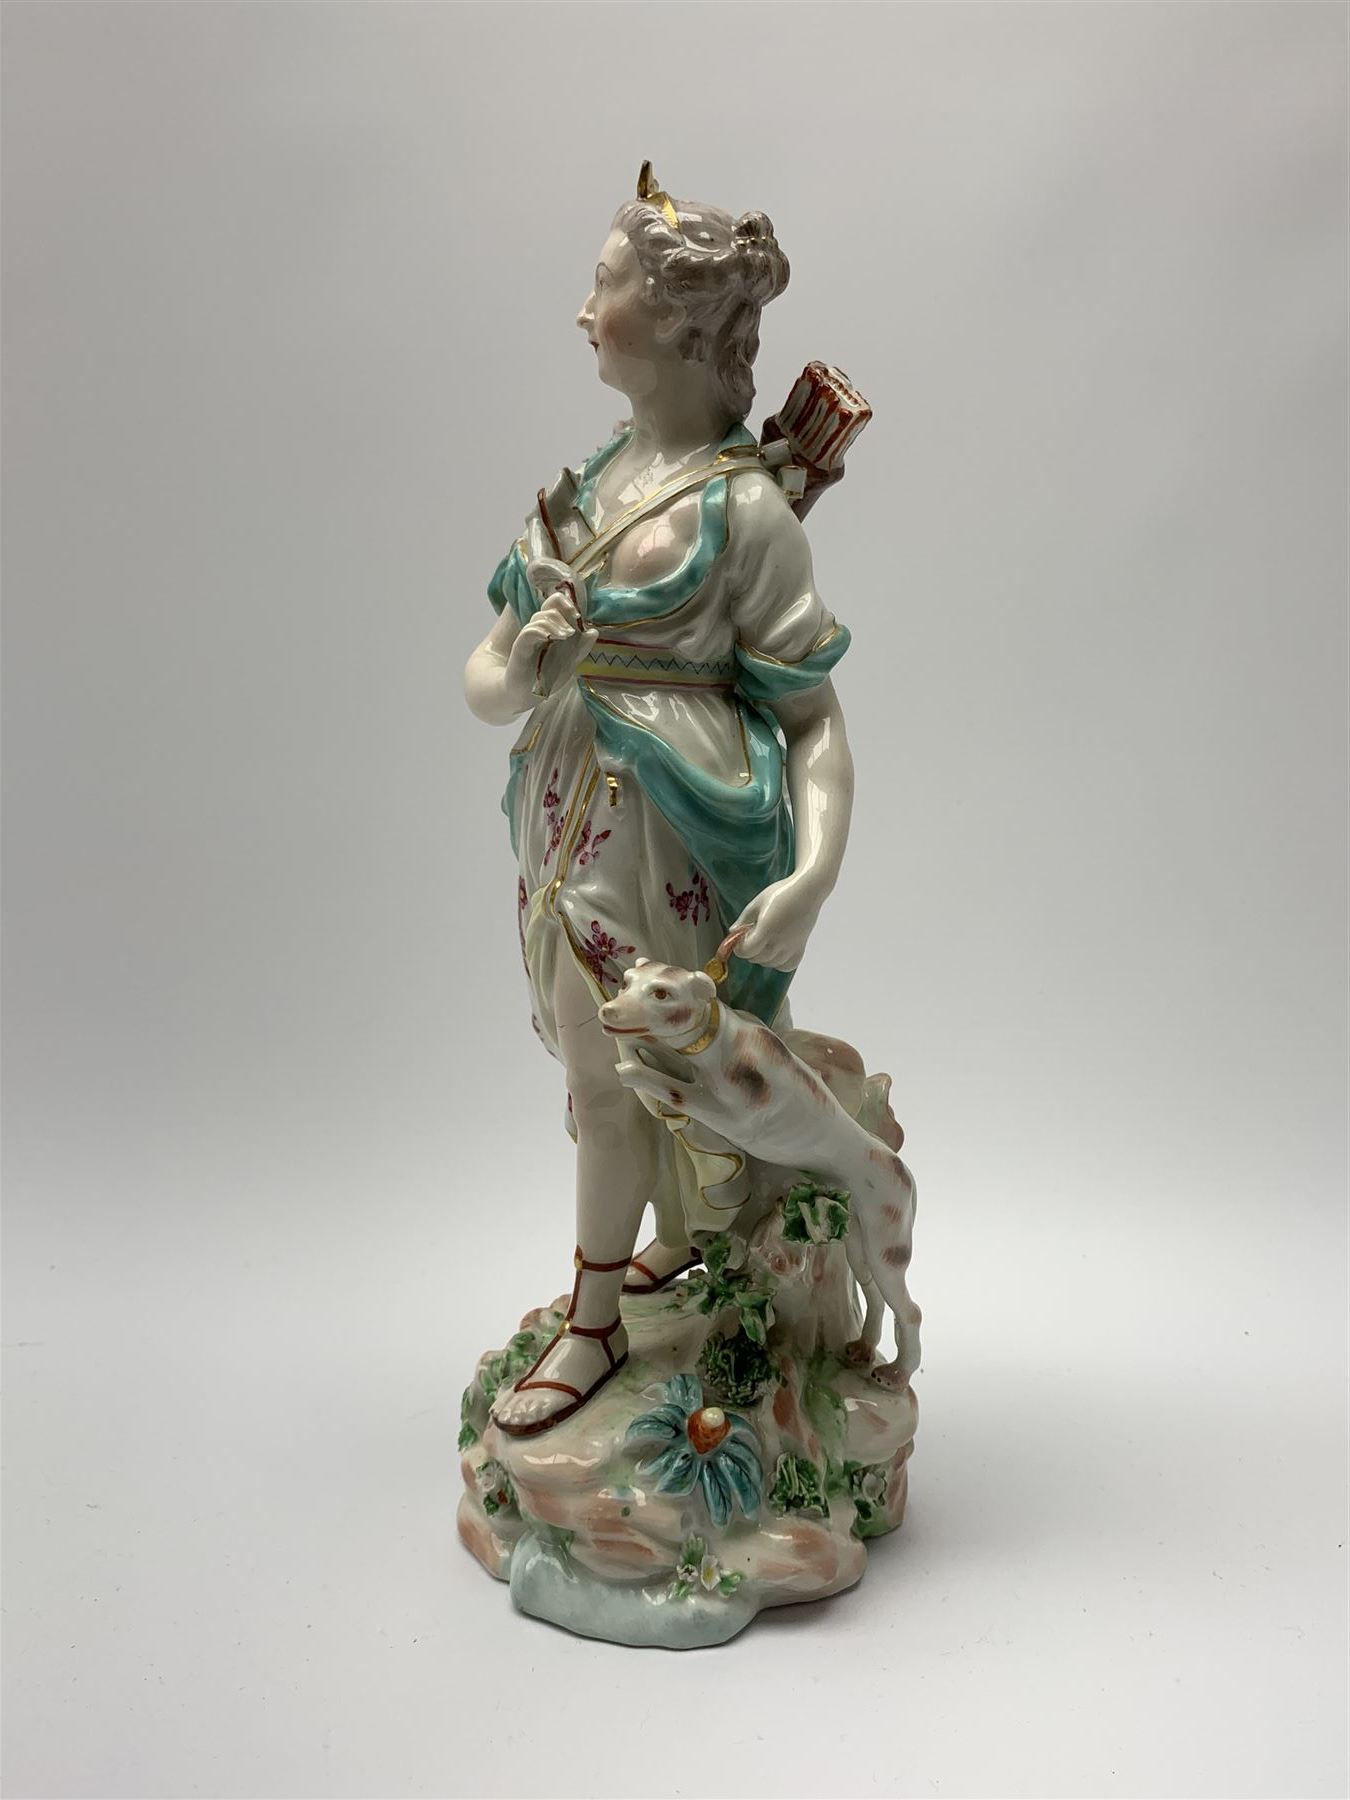 Mid 18th century Derby porcelain figure modelled as Dianna the Huntress - Image 3 of 9